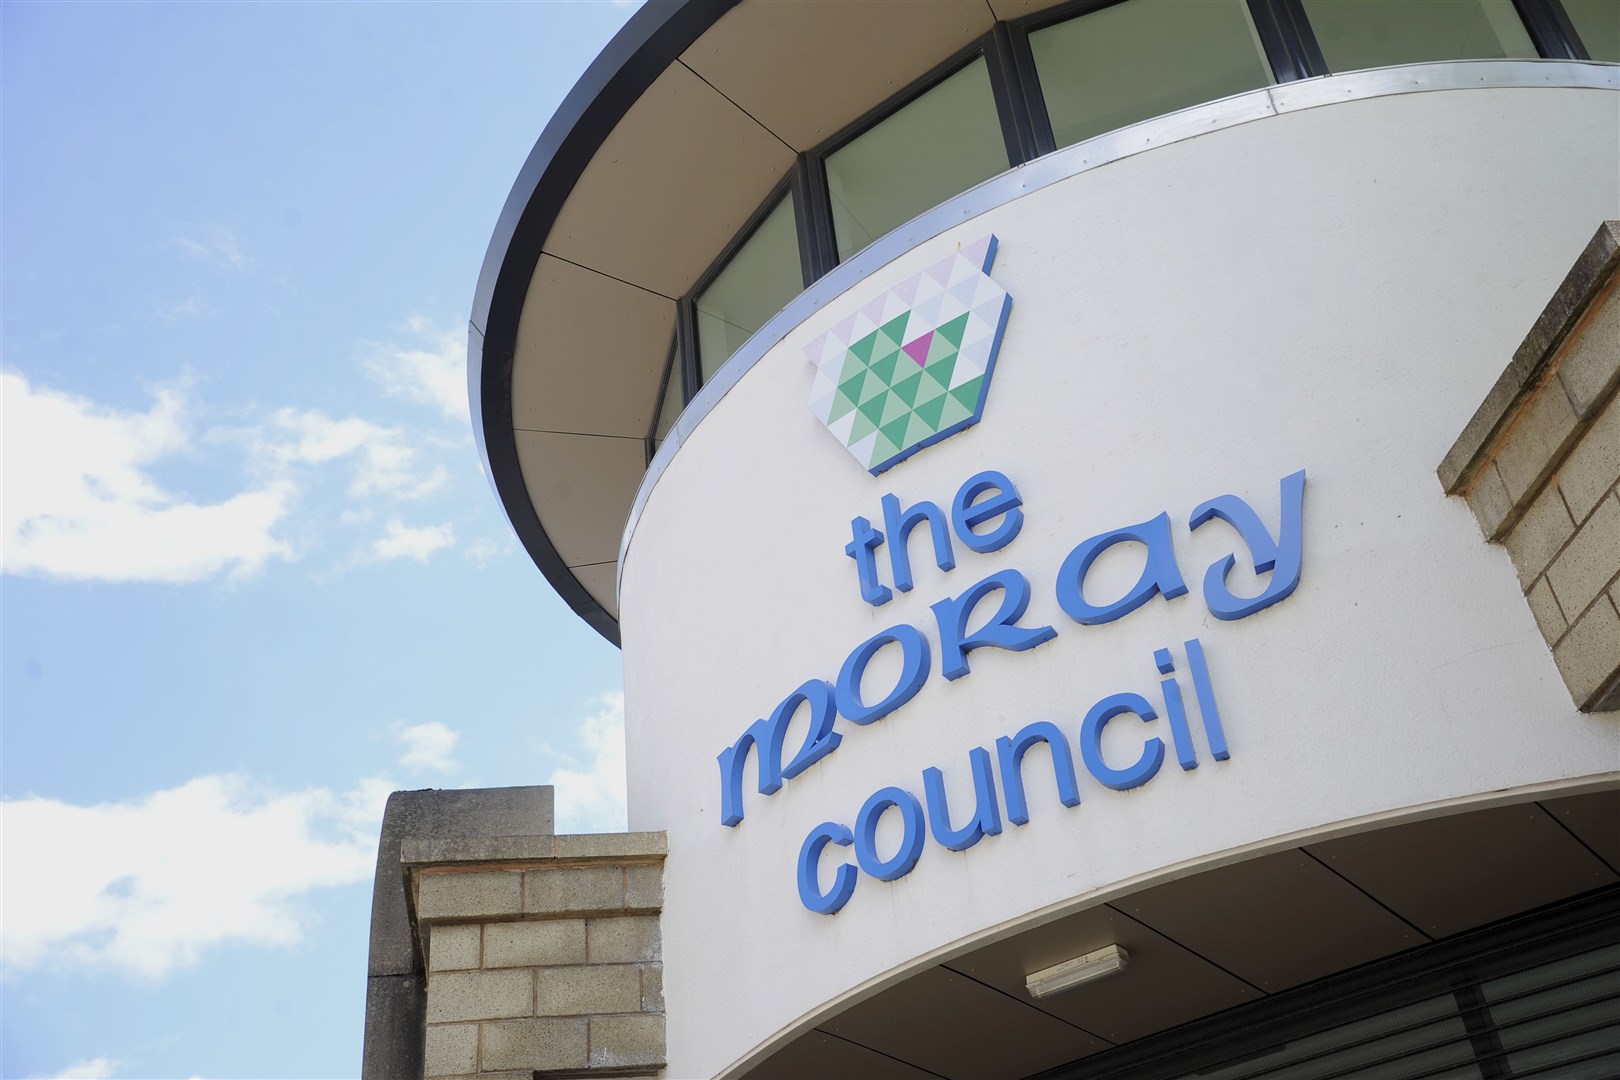 Moray Council's chief executive has urged the area's residents to be patient "as we work through the coming weeks and months together".